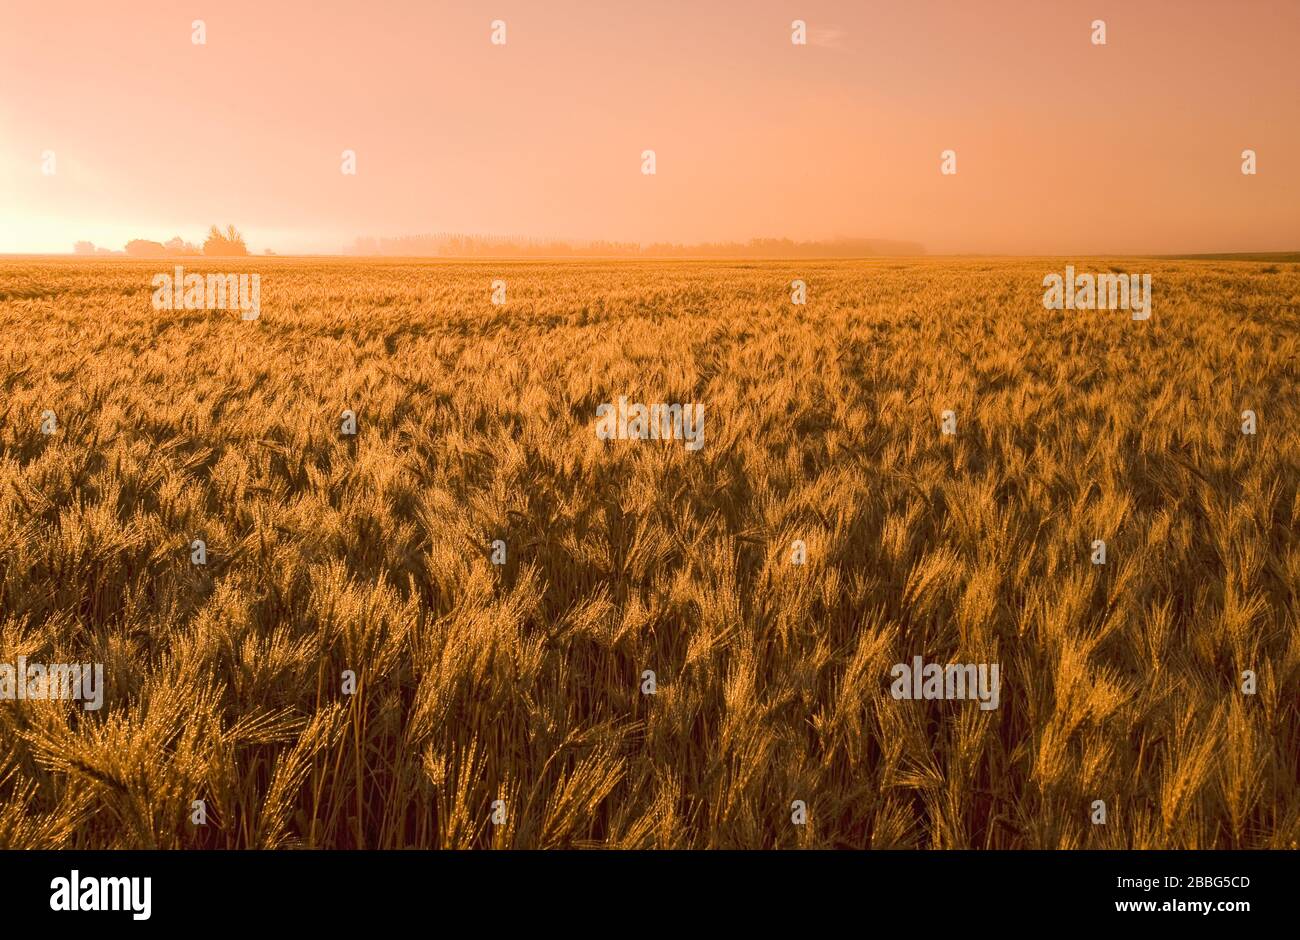 a field of mature, harvest ready spring wheat on a misty morning, near Dugald, Manitoba, Canada Stock Photo